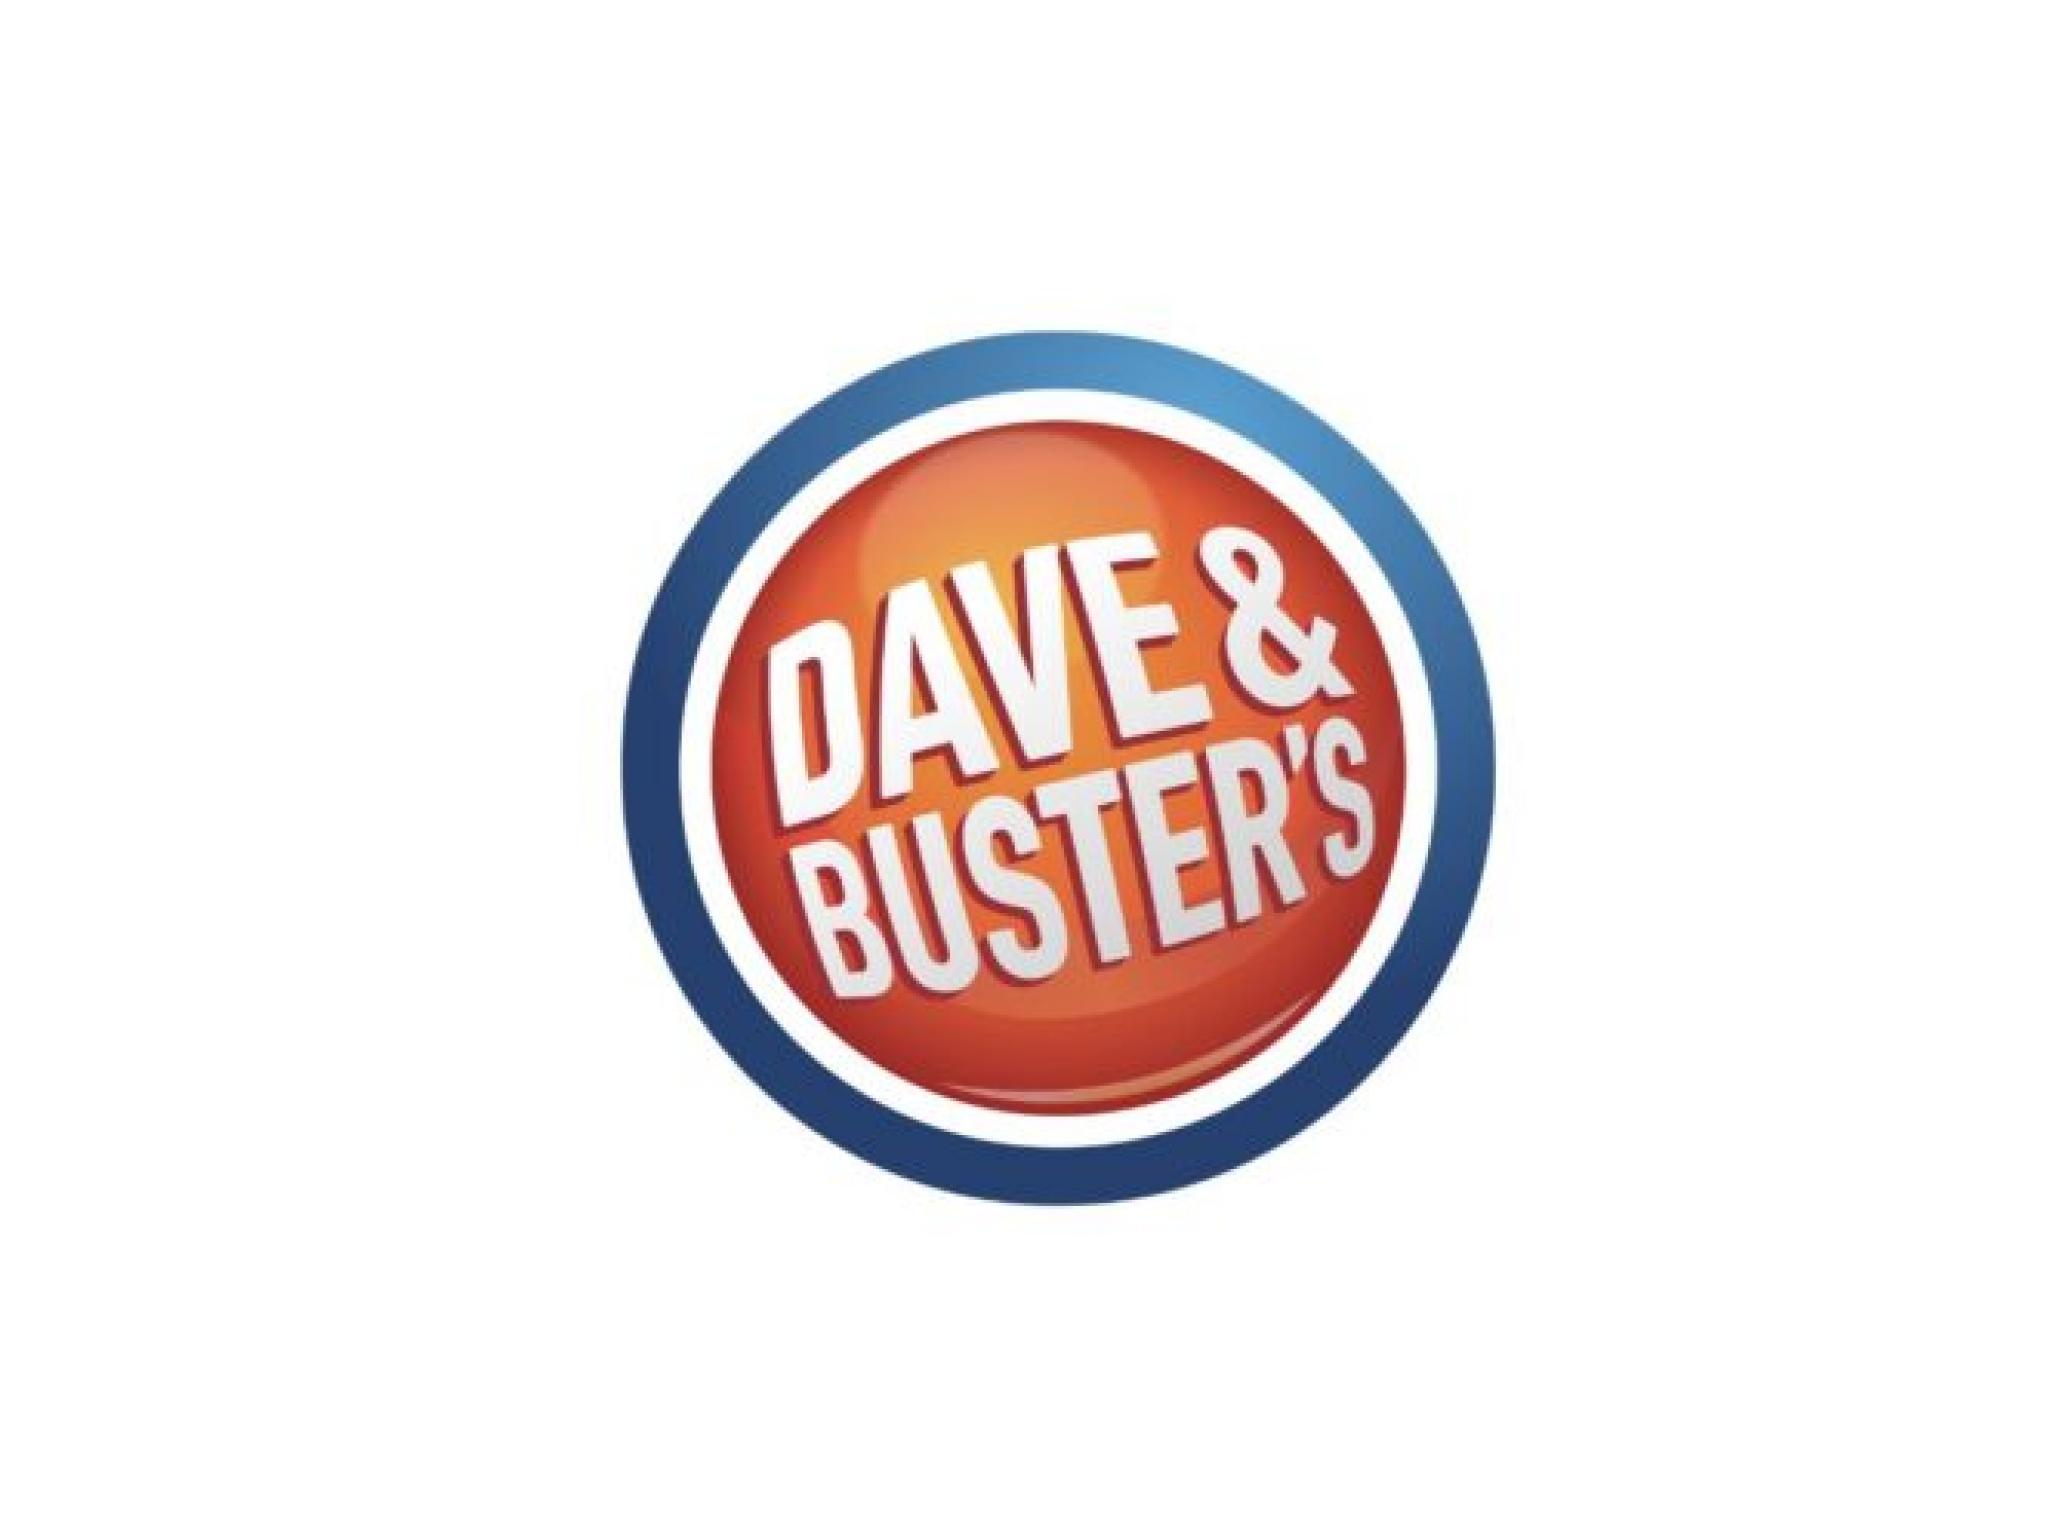  dave--busters-posts-downbeat-results-joins-jjill-and-other-big-stocks-moving-lower-in-thursdays-pre-market-session 